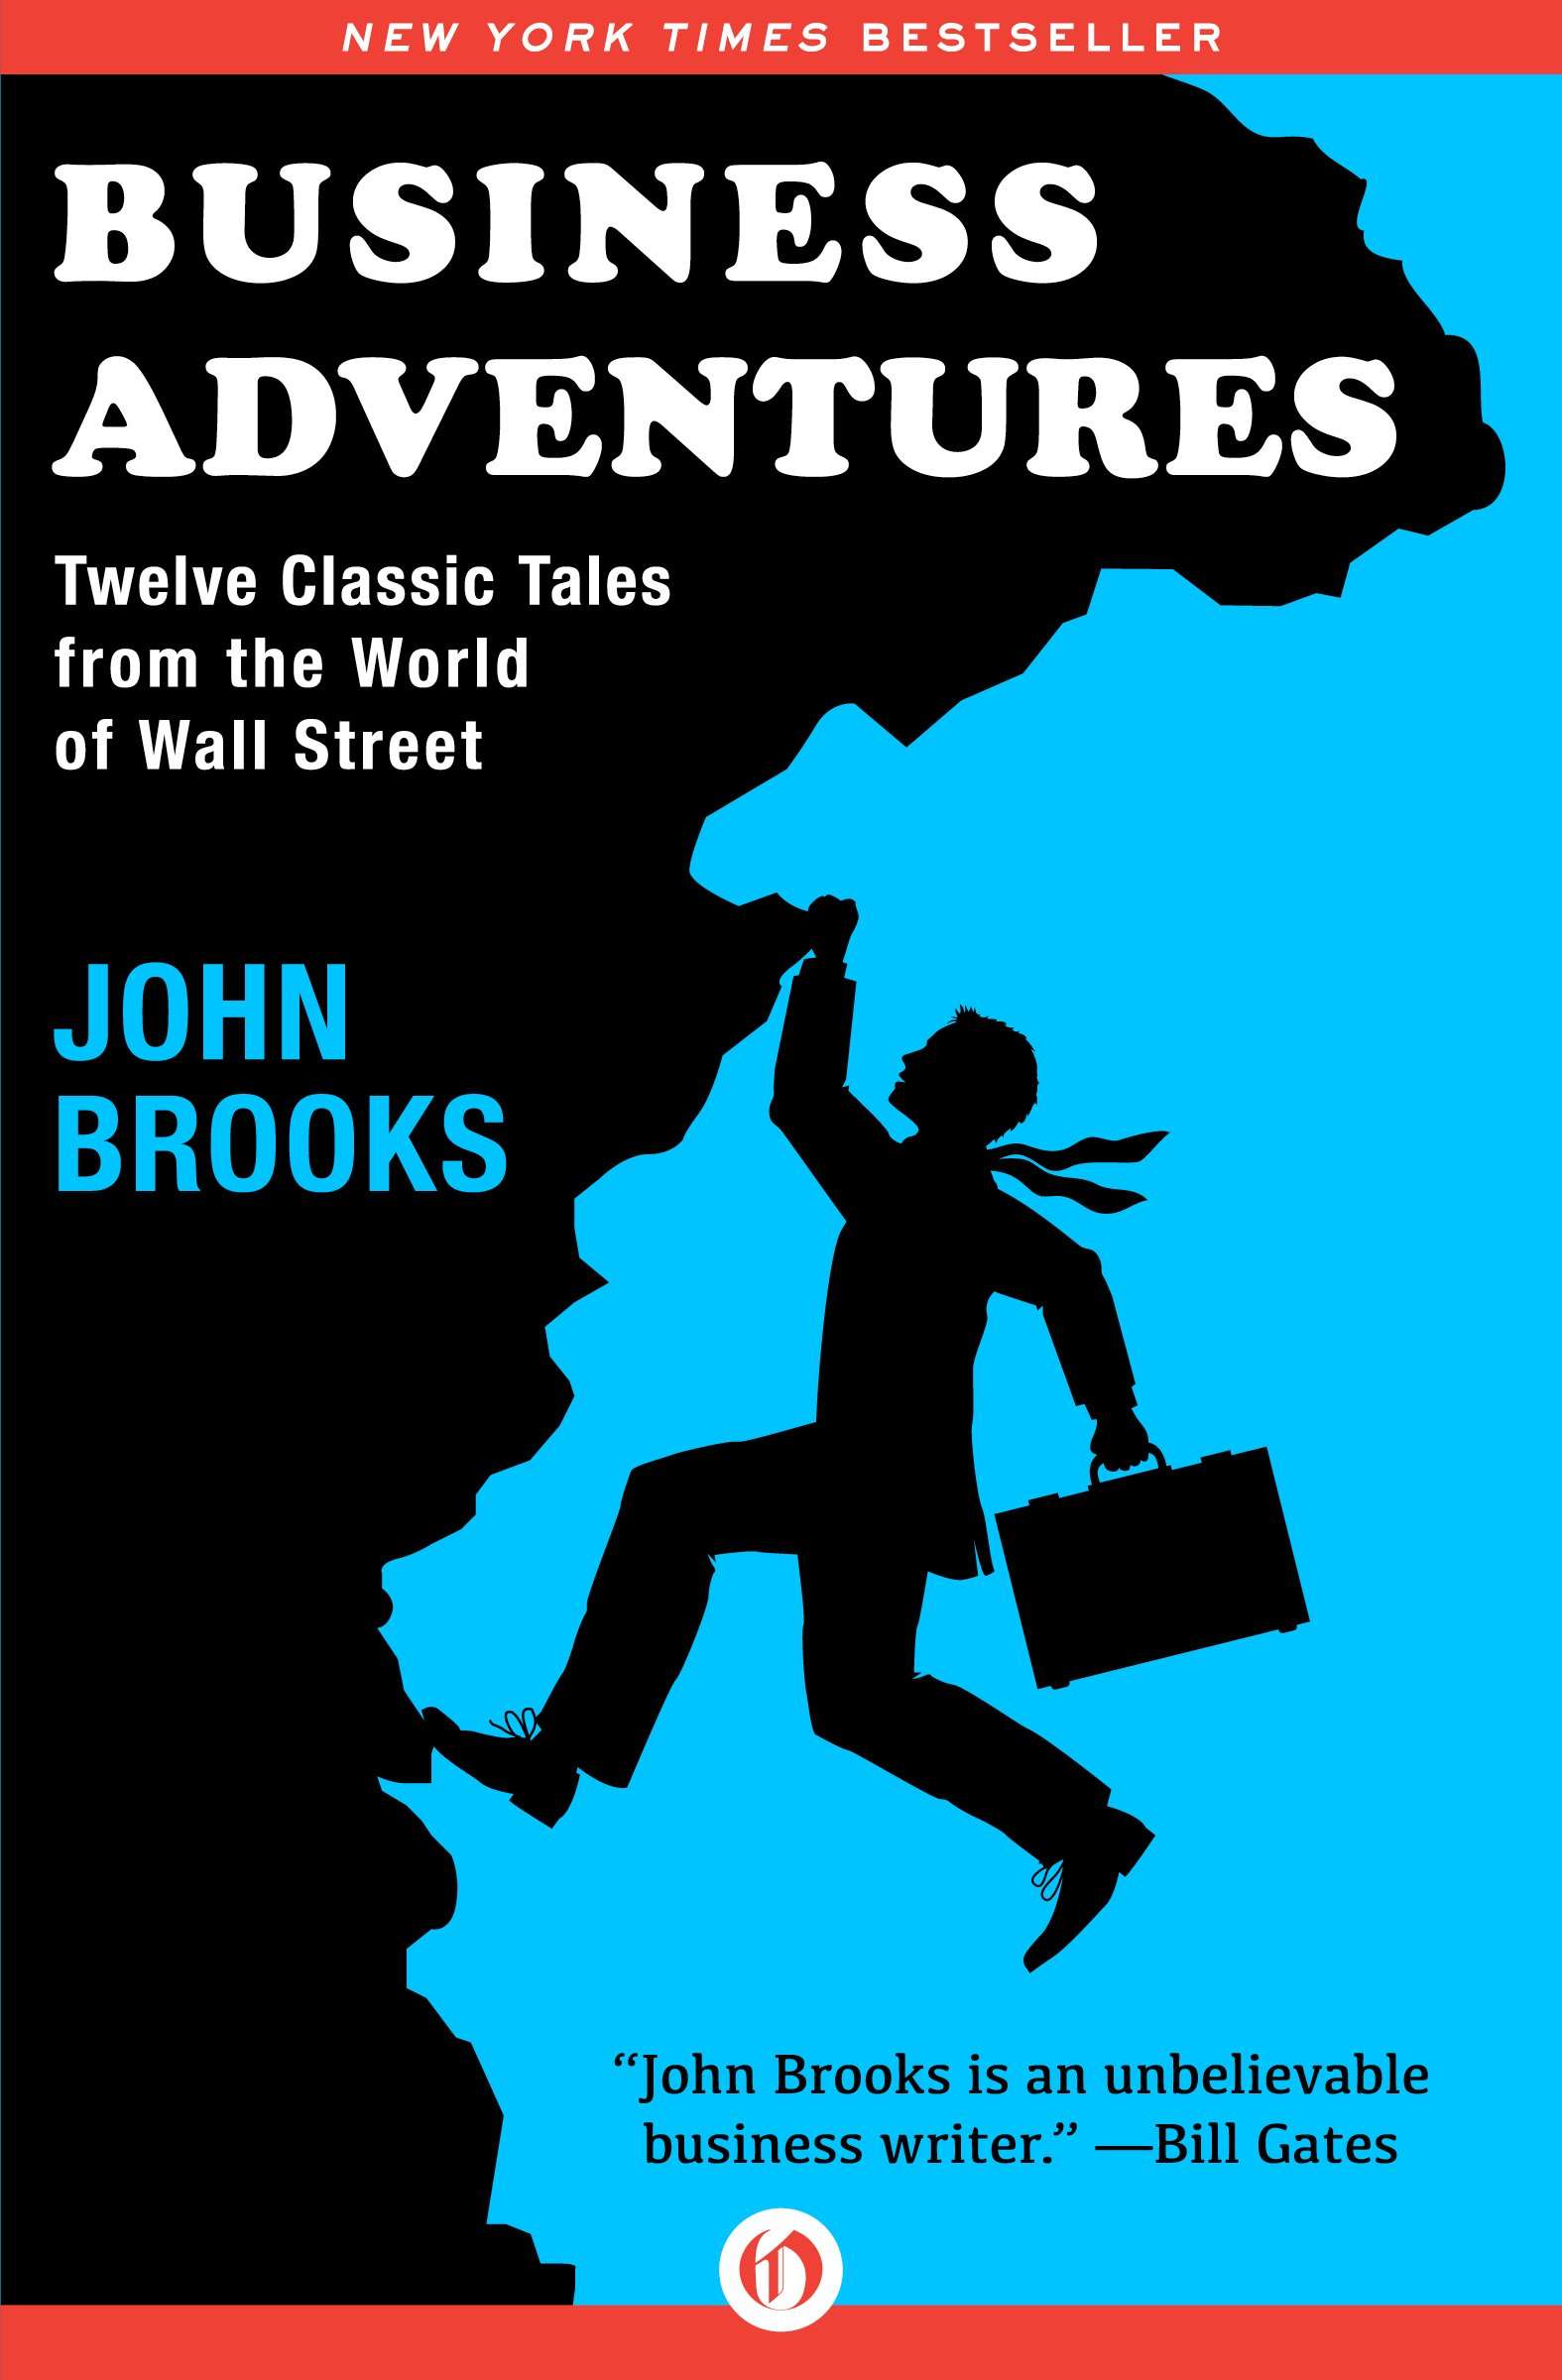 Former Microsoft CEO Bill Gates: "Business Adventures: Twelve Classic Tales from the World of Wall Street" by John Brooks